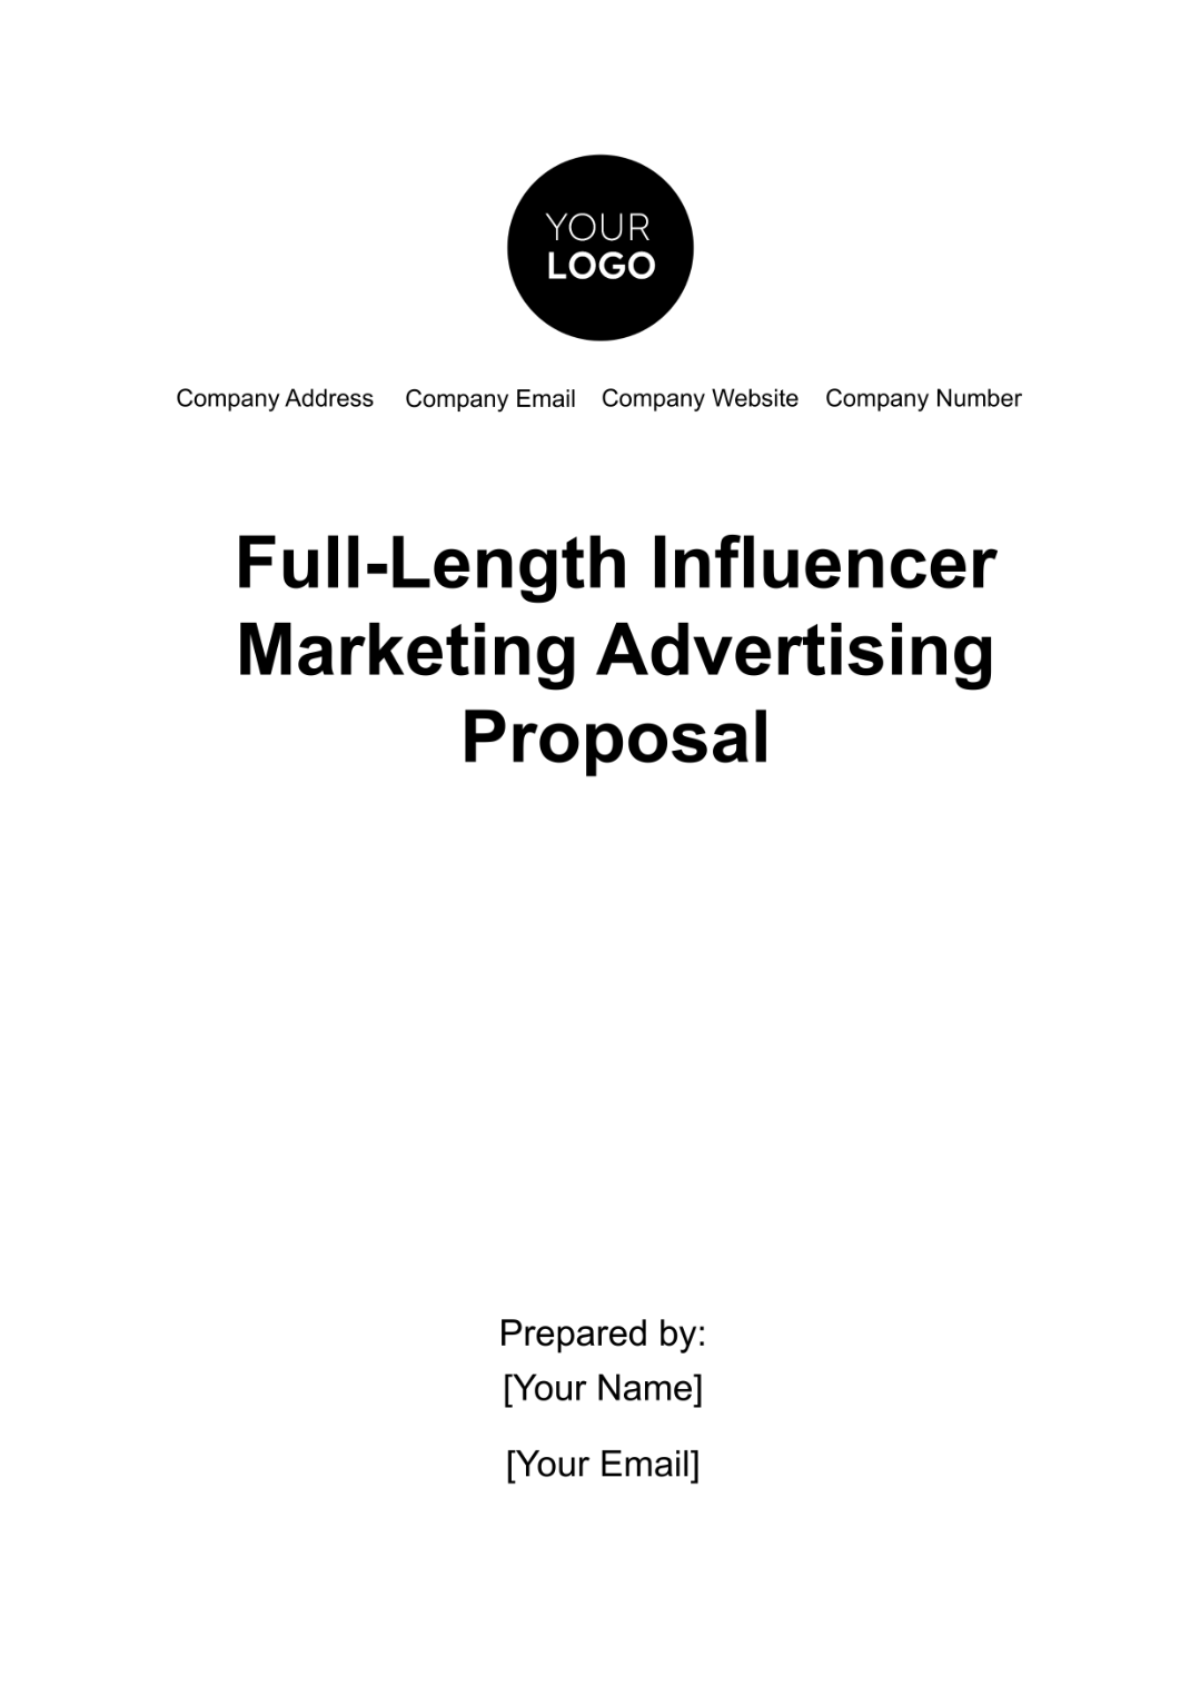 Free Full-Length Influencer Marketing Advertising Proposal Template